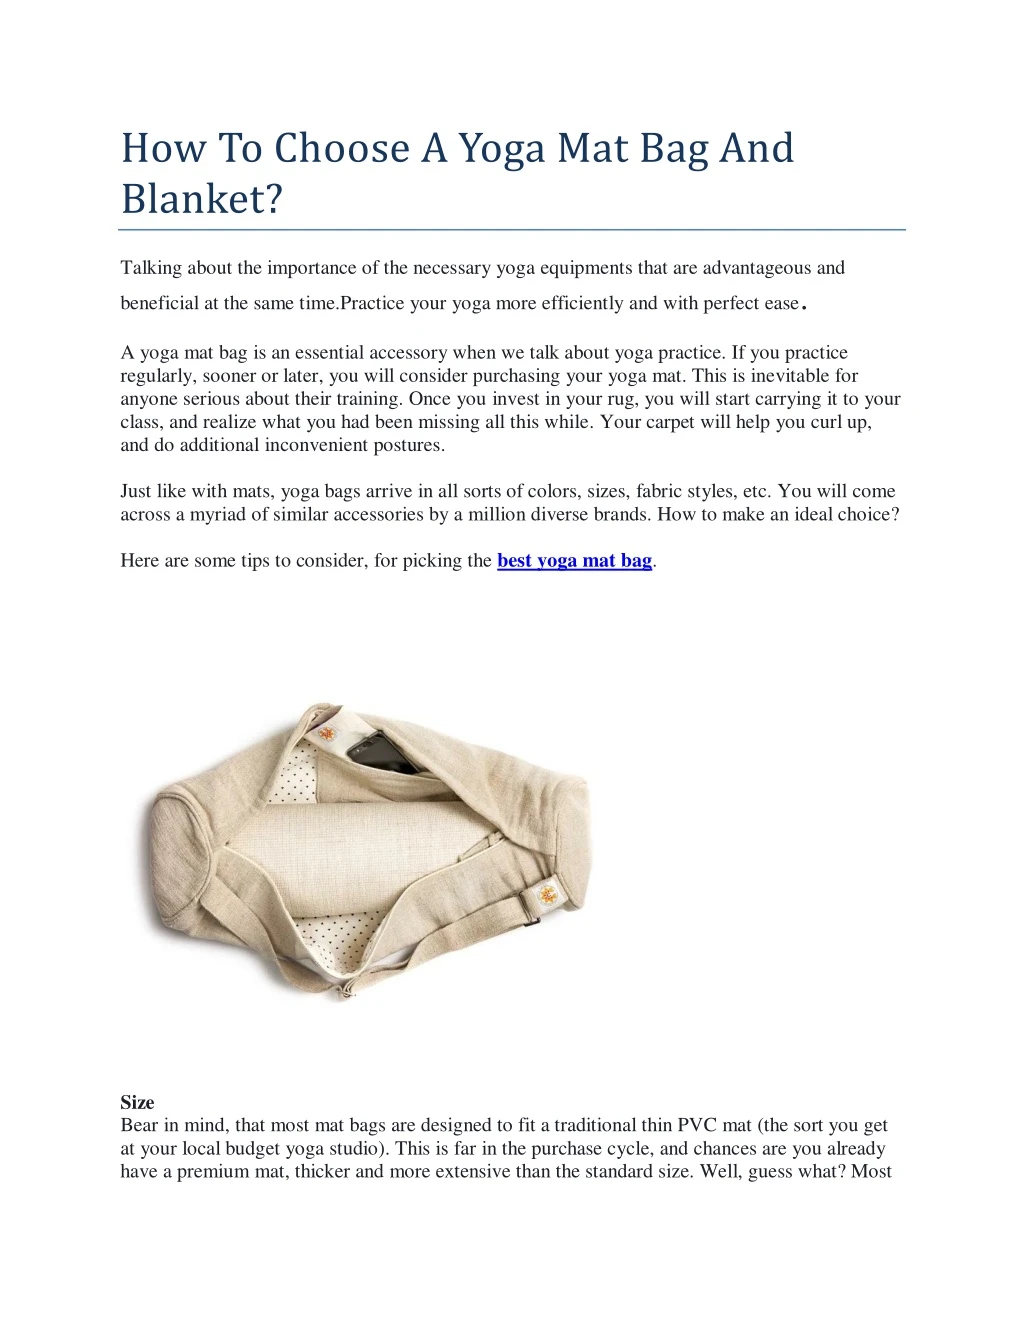 how to choose a yoga mat bag and blanket